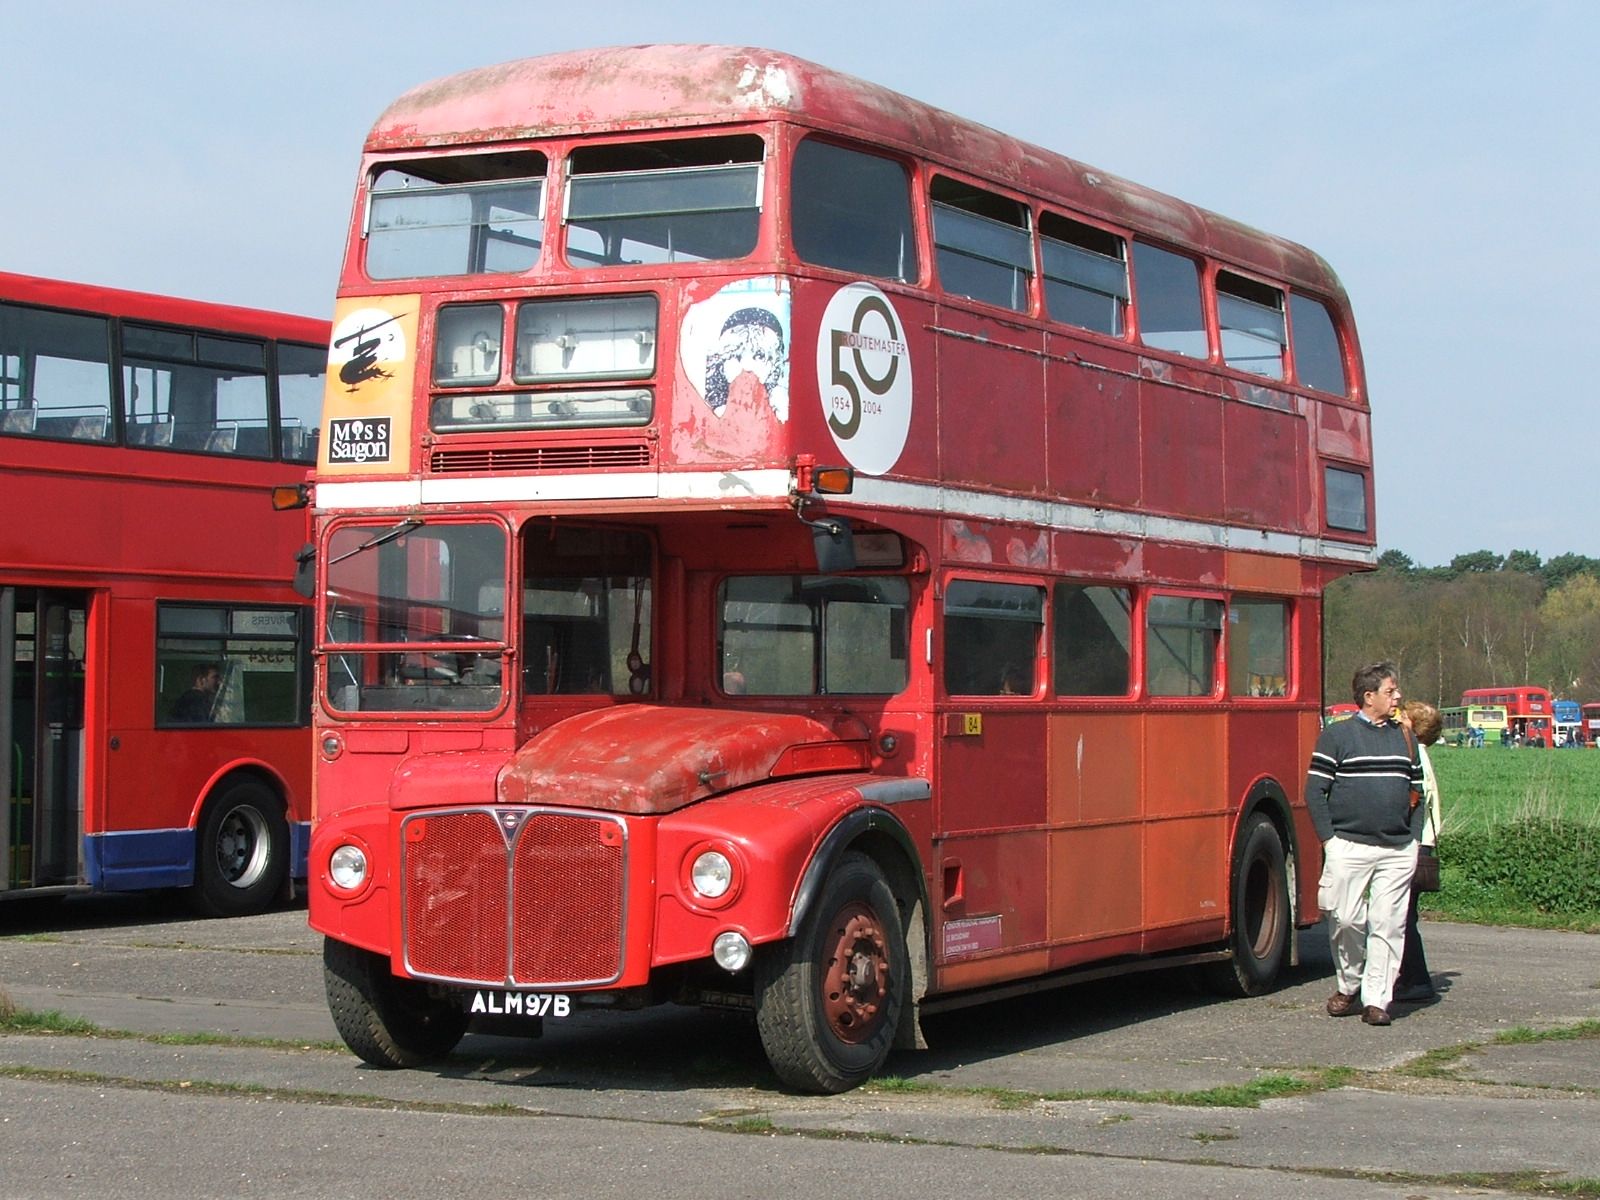 a double decker bus sits parked beside another bus